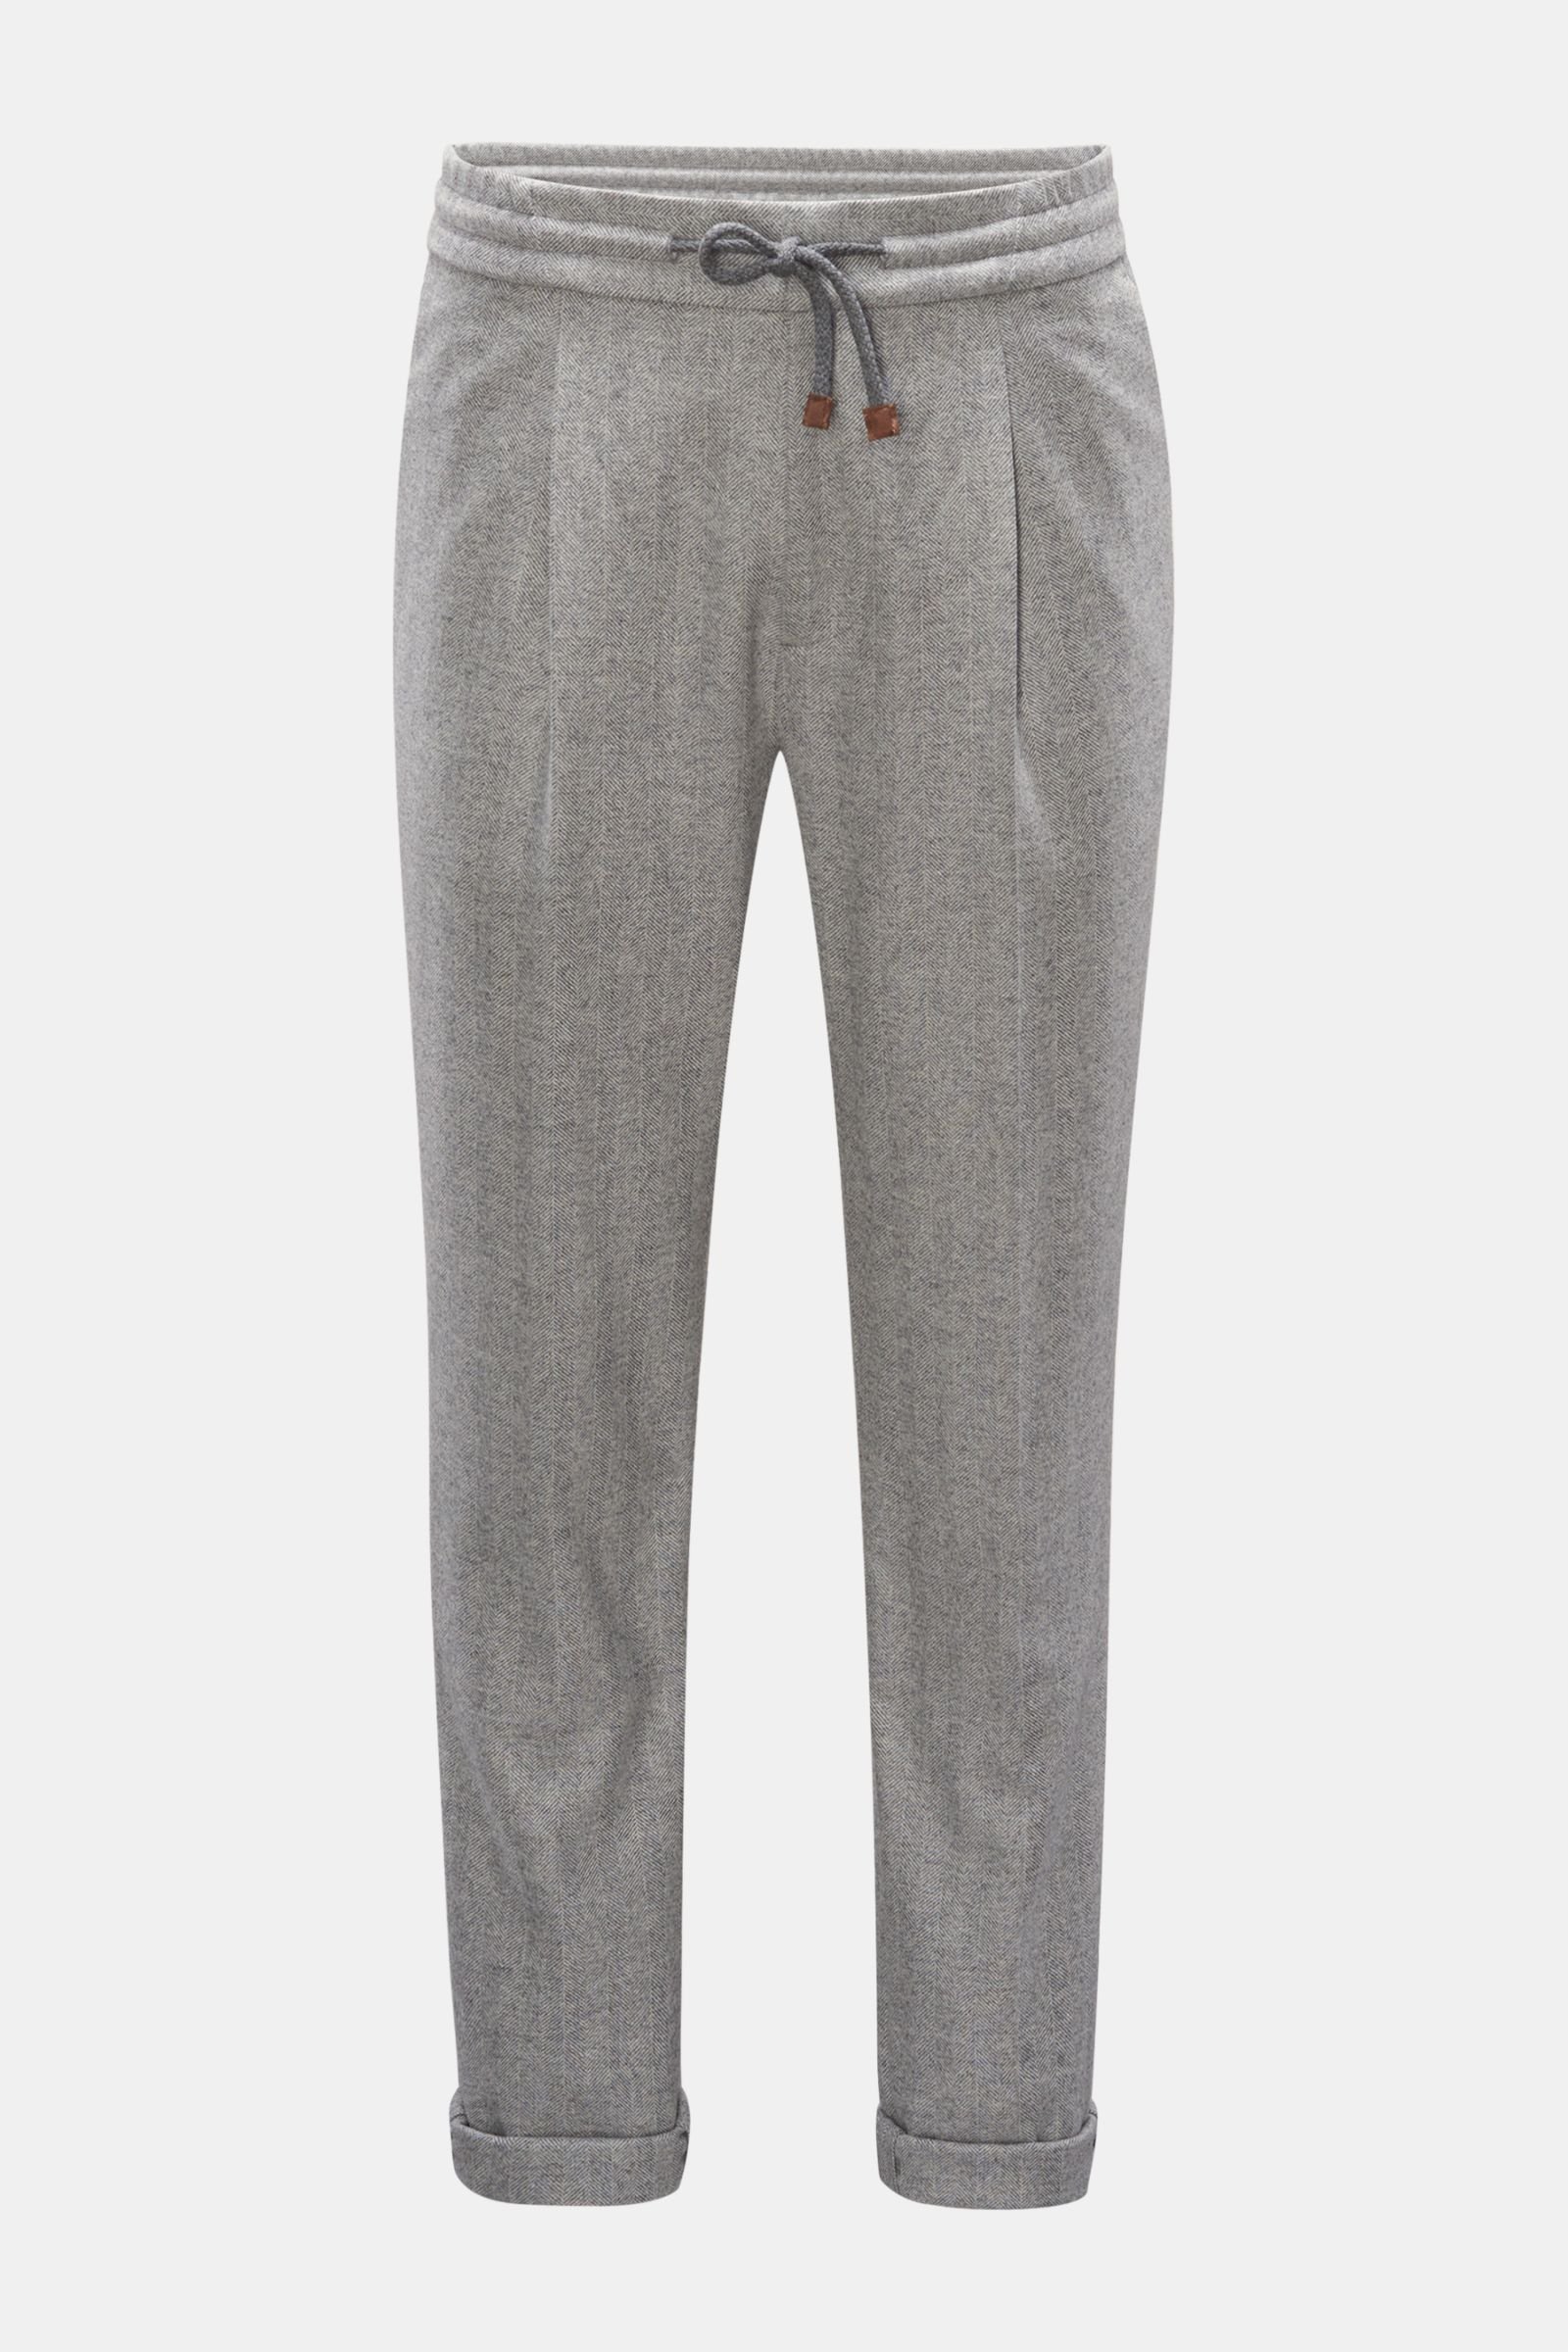 Wool jogger pants 'Leisure Fit' light grey patterned